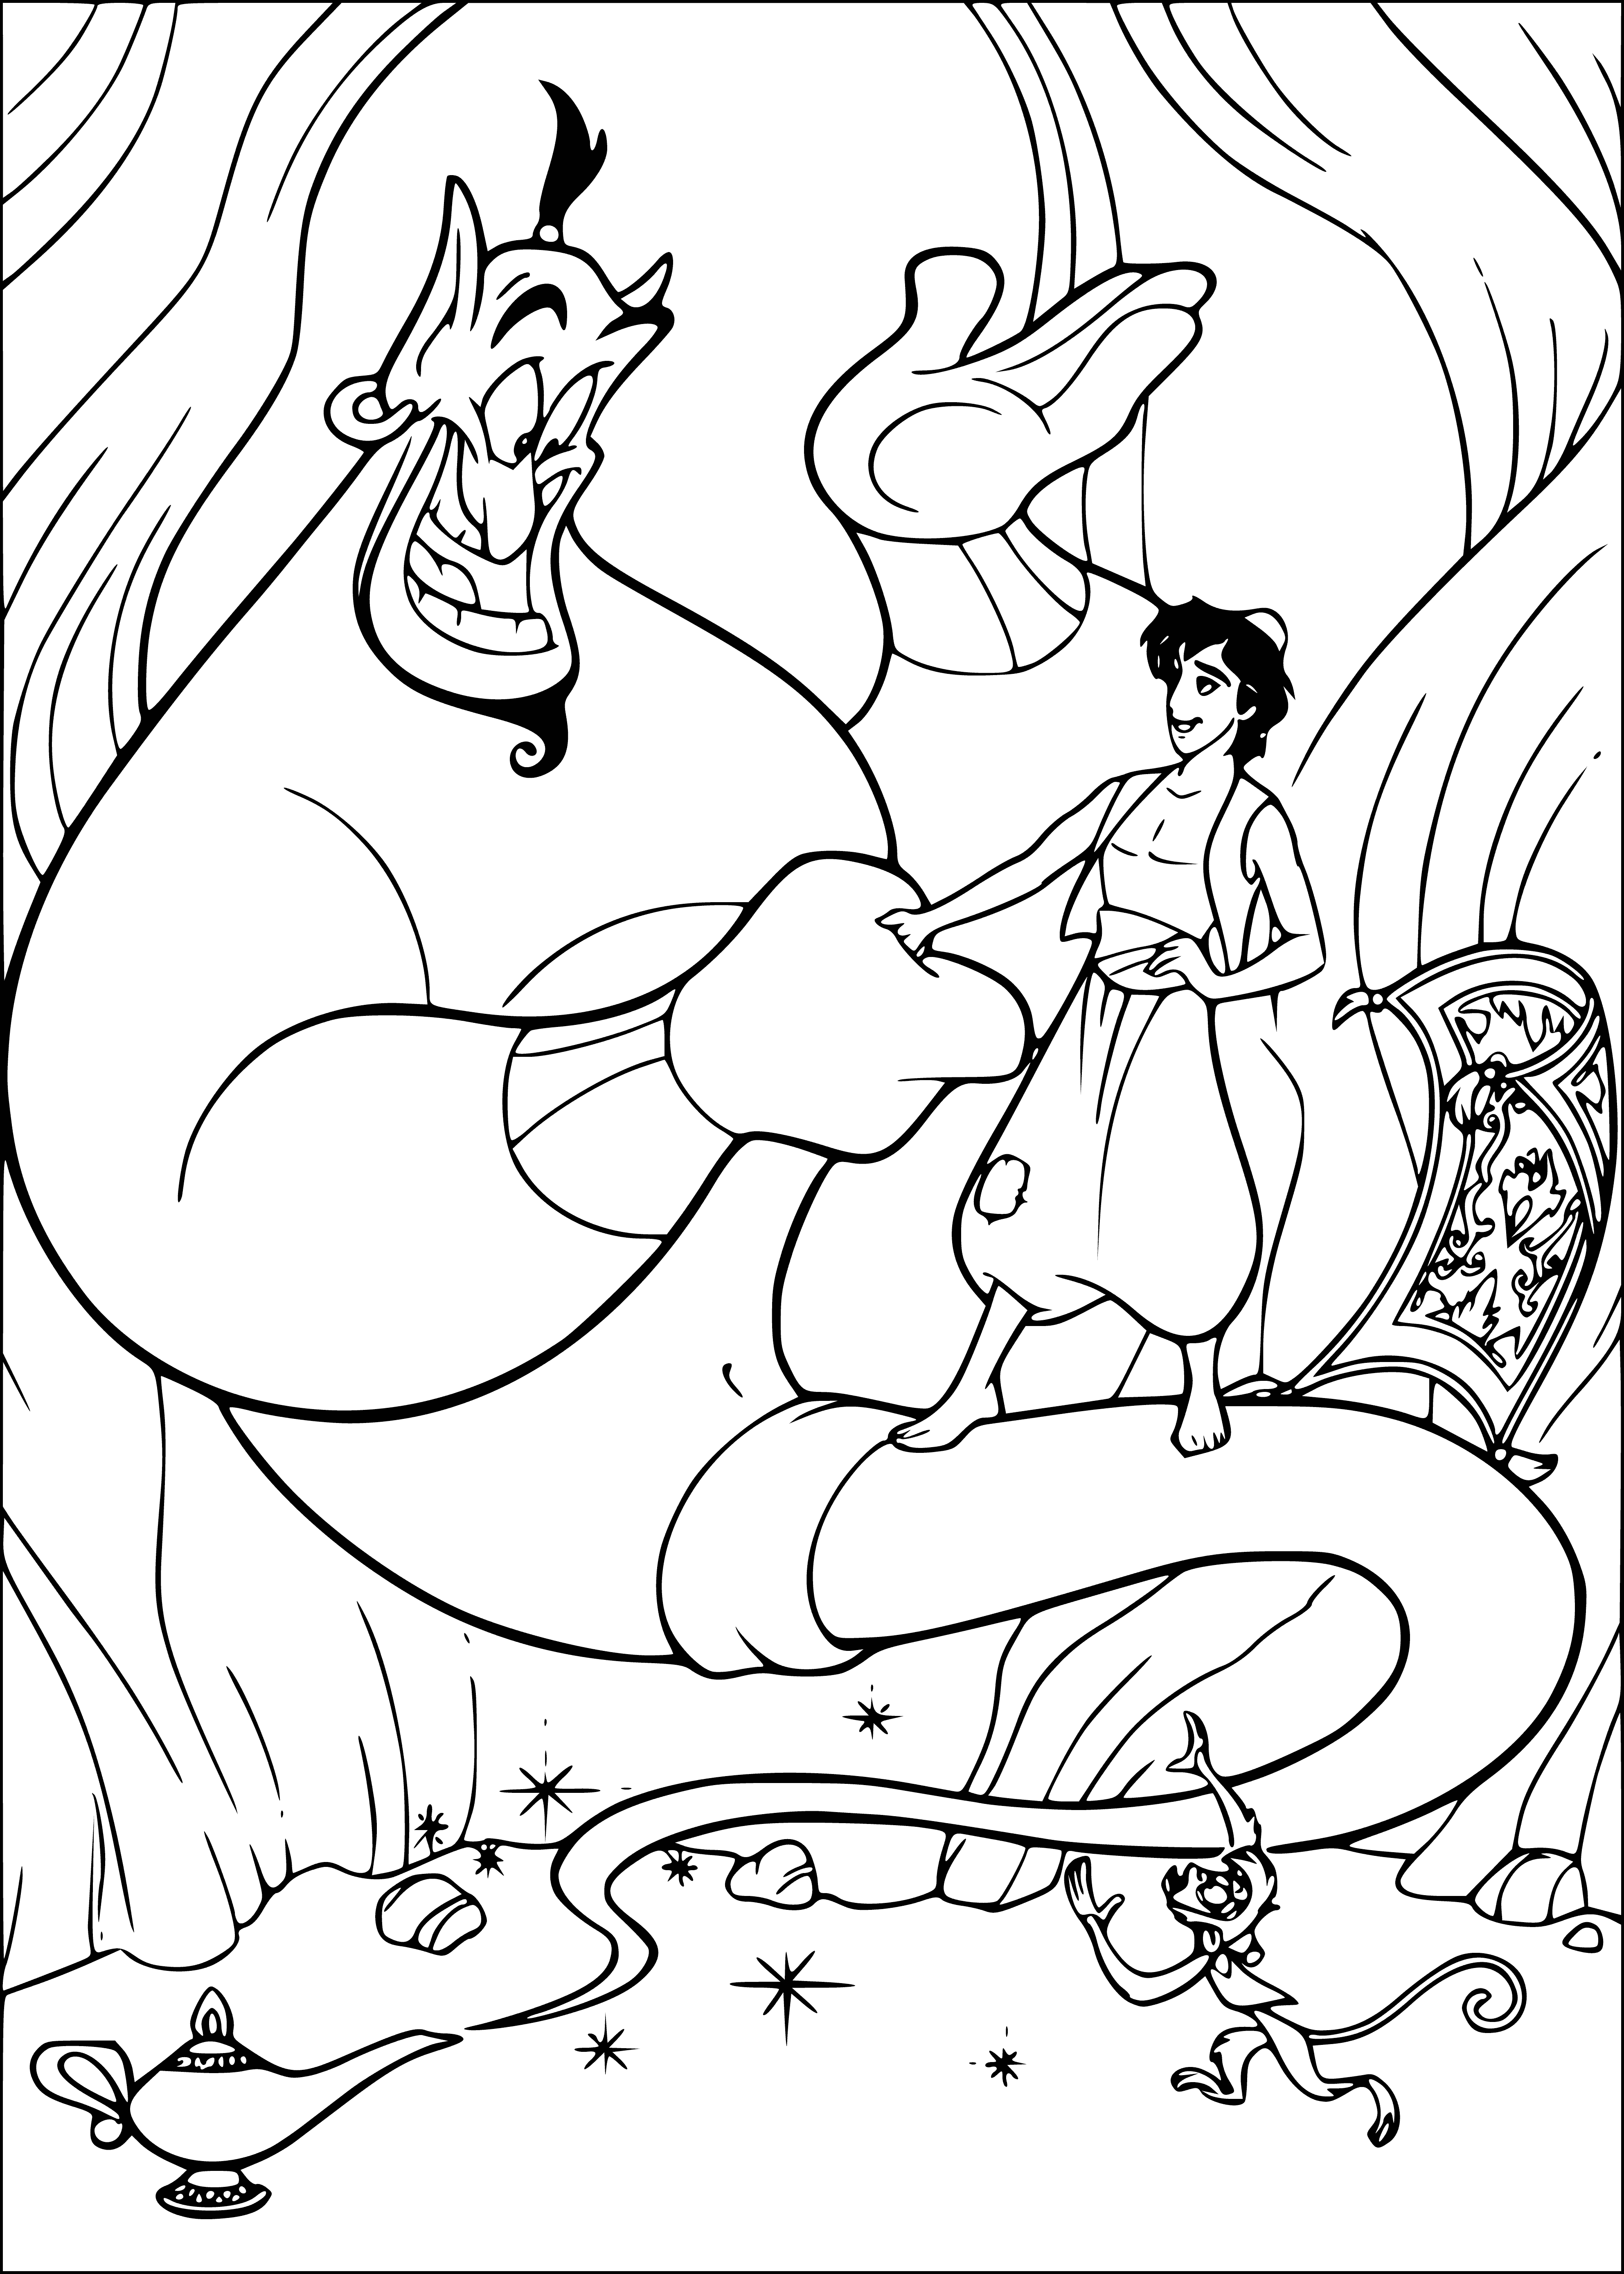 coloring page: --> Aladdin is ecstatic to find a lamp in a cave; a wish-granting adventure awaits!